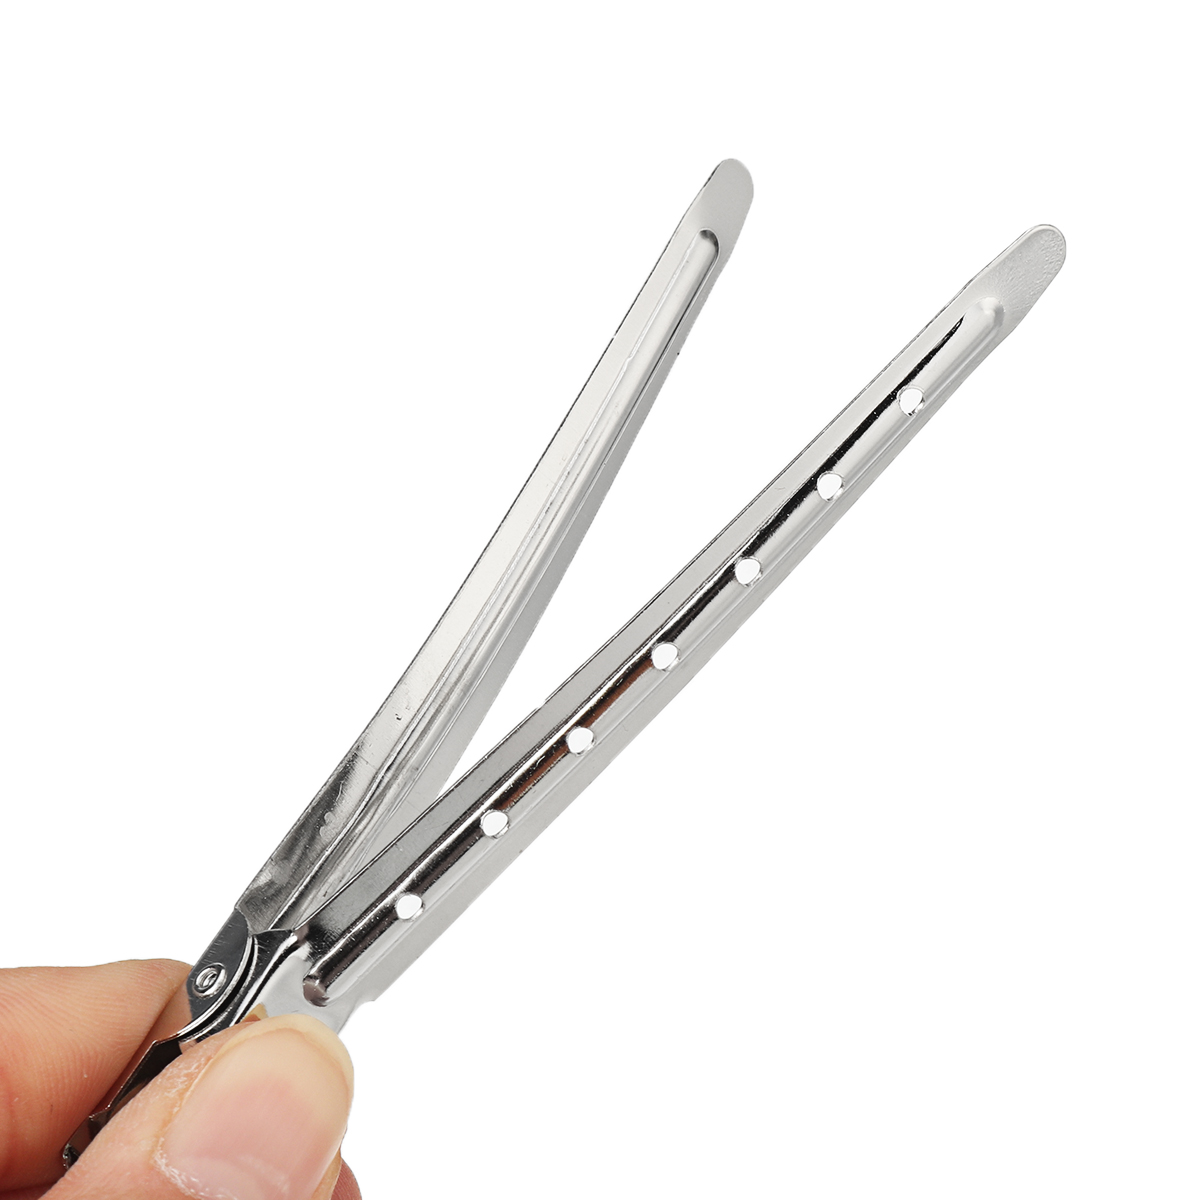 13Pcs-Stainless-Steel-Hairdressing-Shears-Set-Professional-Thinning-Scissors-For-BarberSalonHomeMenW-1906111-16